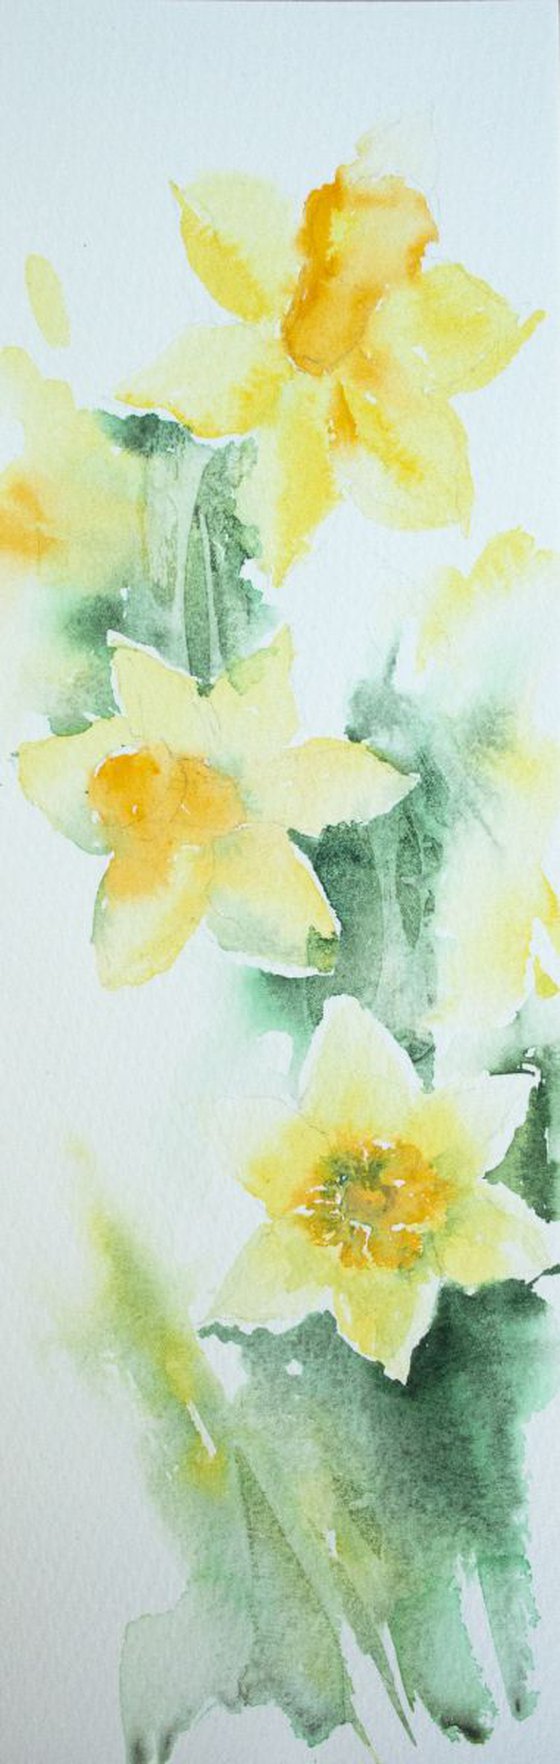 Dancing in the Breeze - Daffodil painting, Spring Floral Art, Original Watercolour Painting